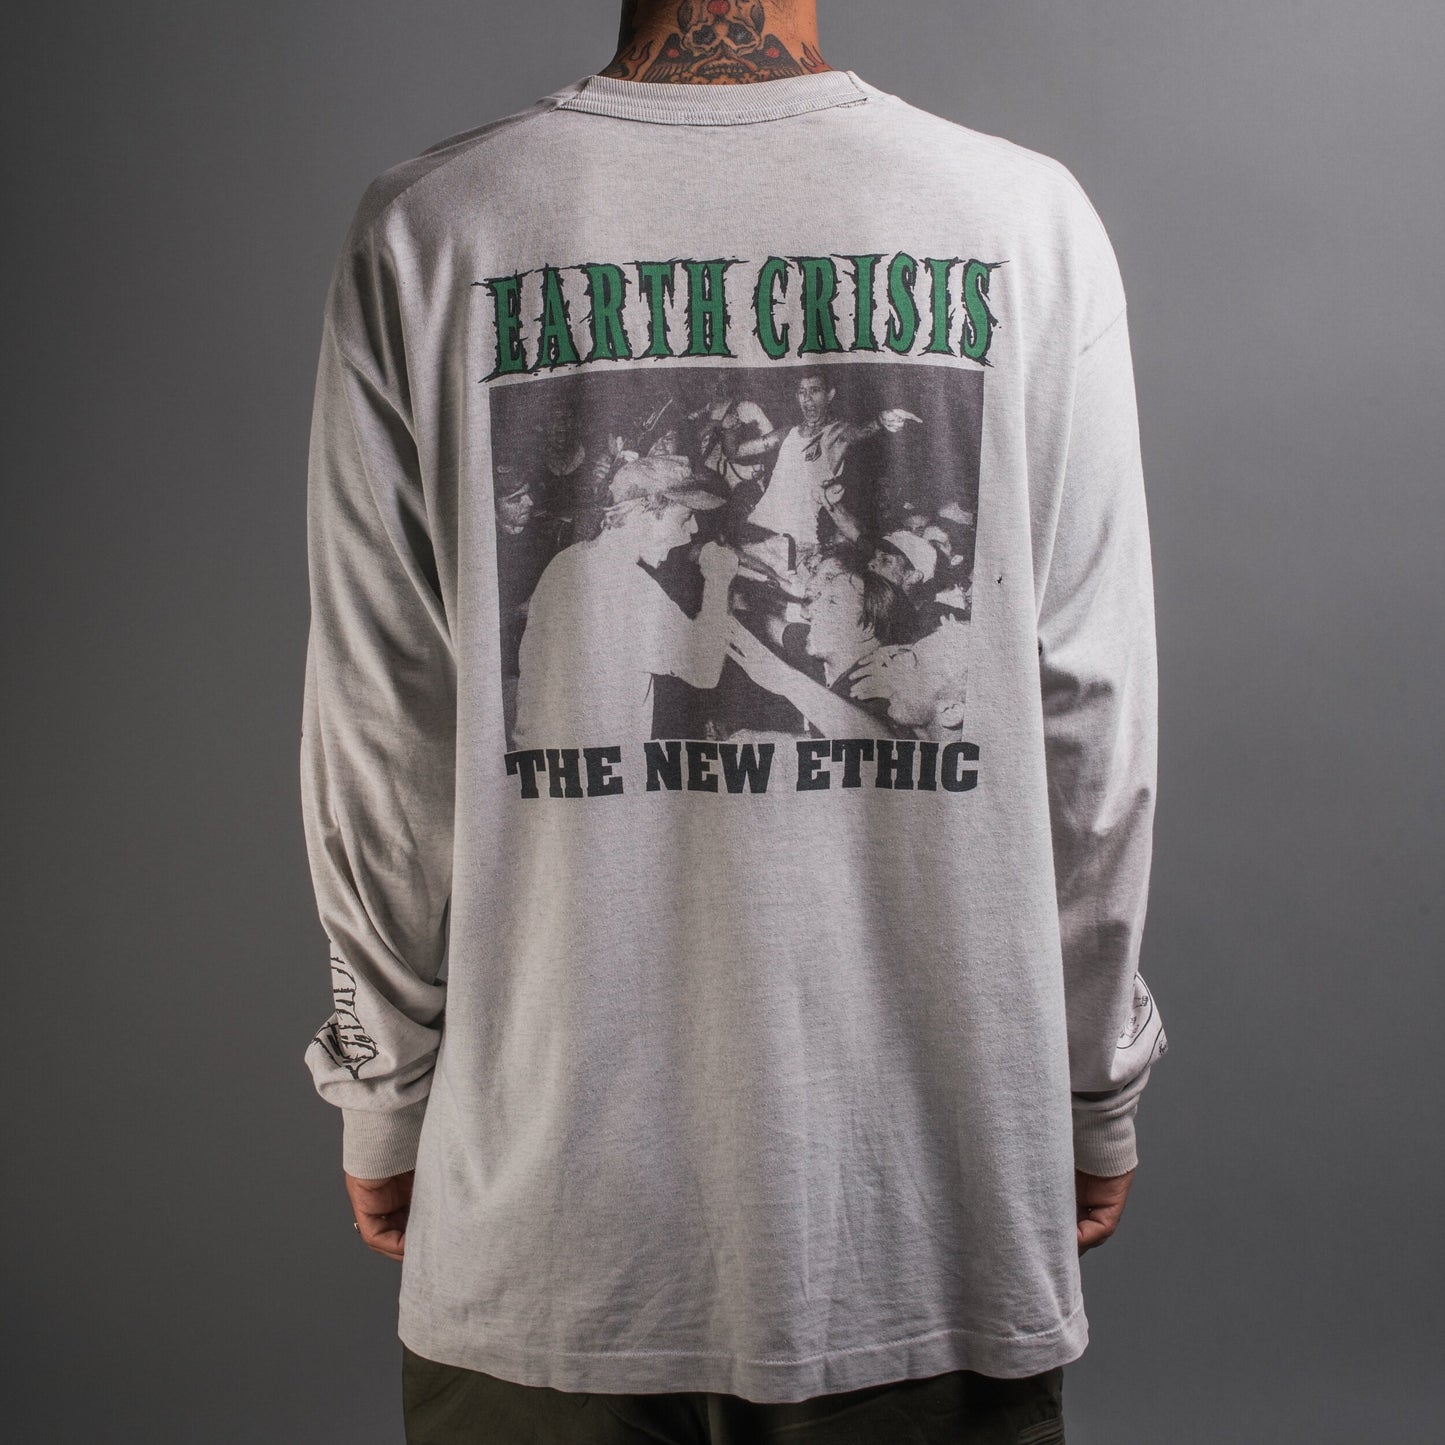 Vintage 90’s Earth Crisis The New Ethic Longsleeve